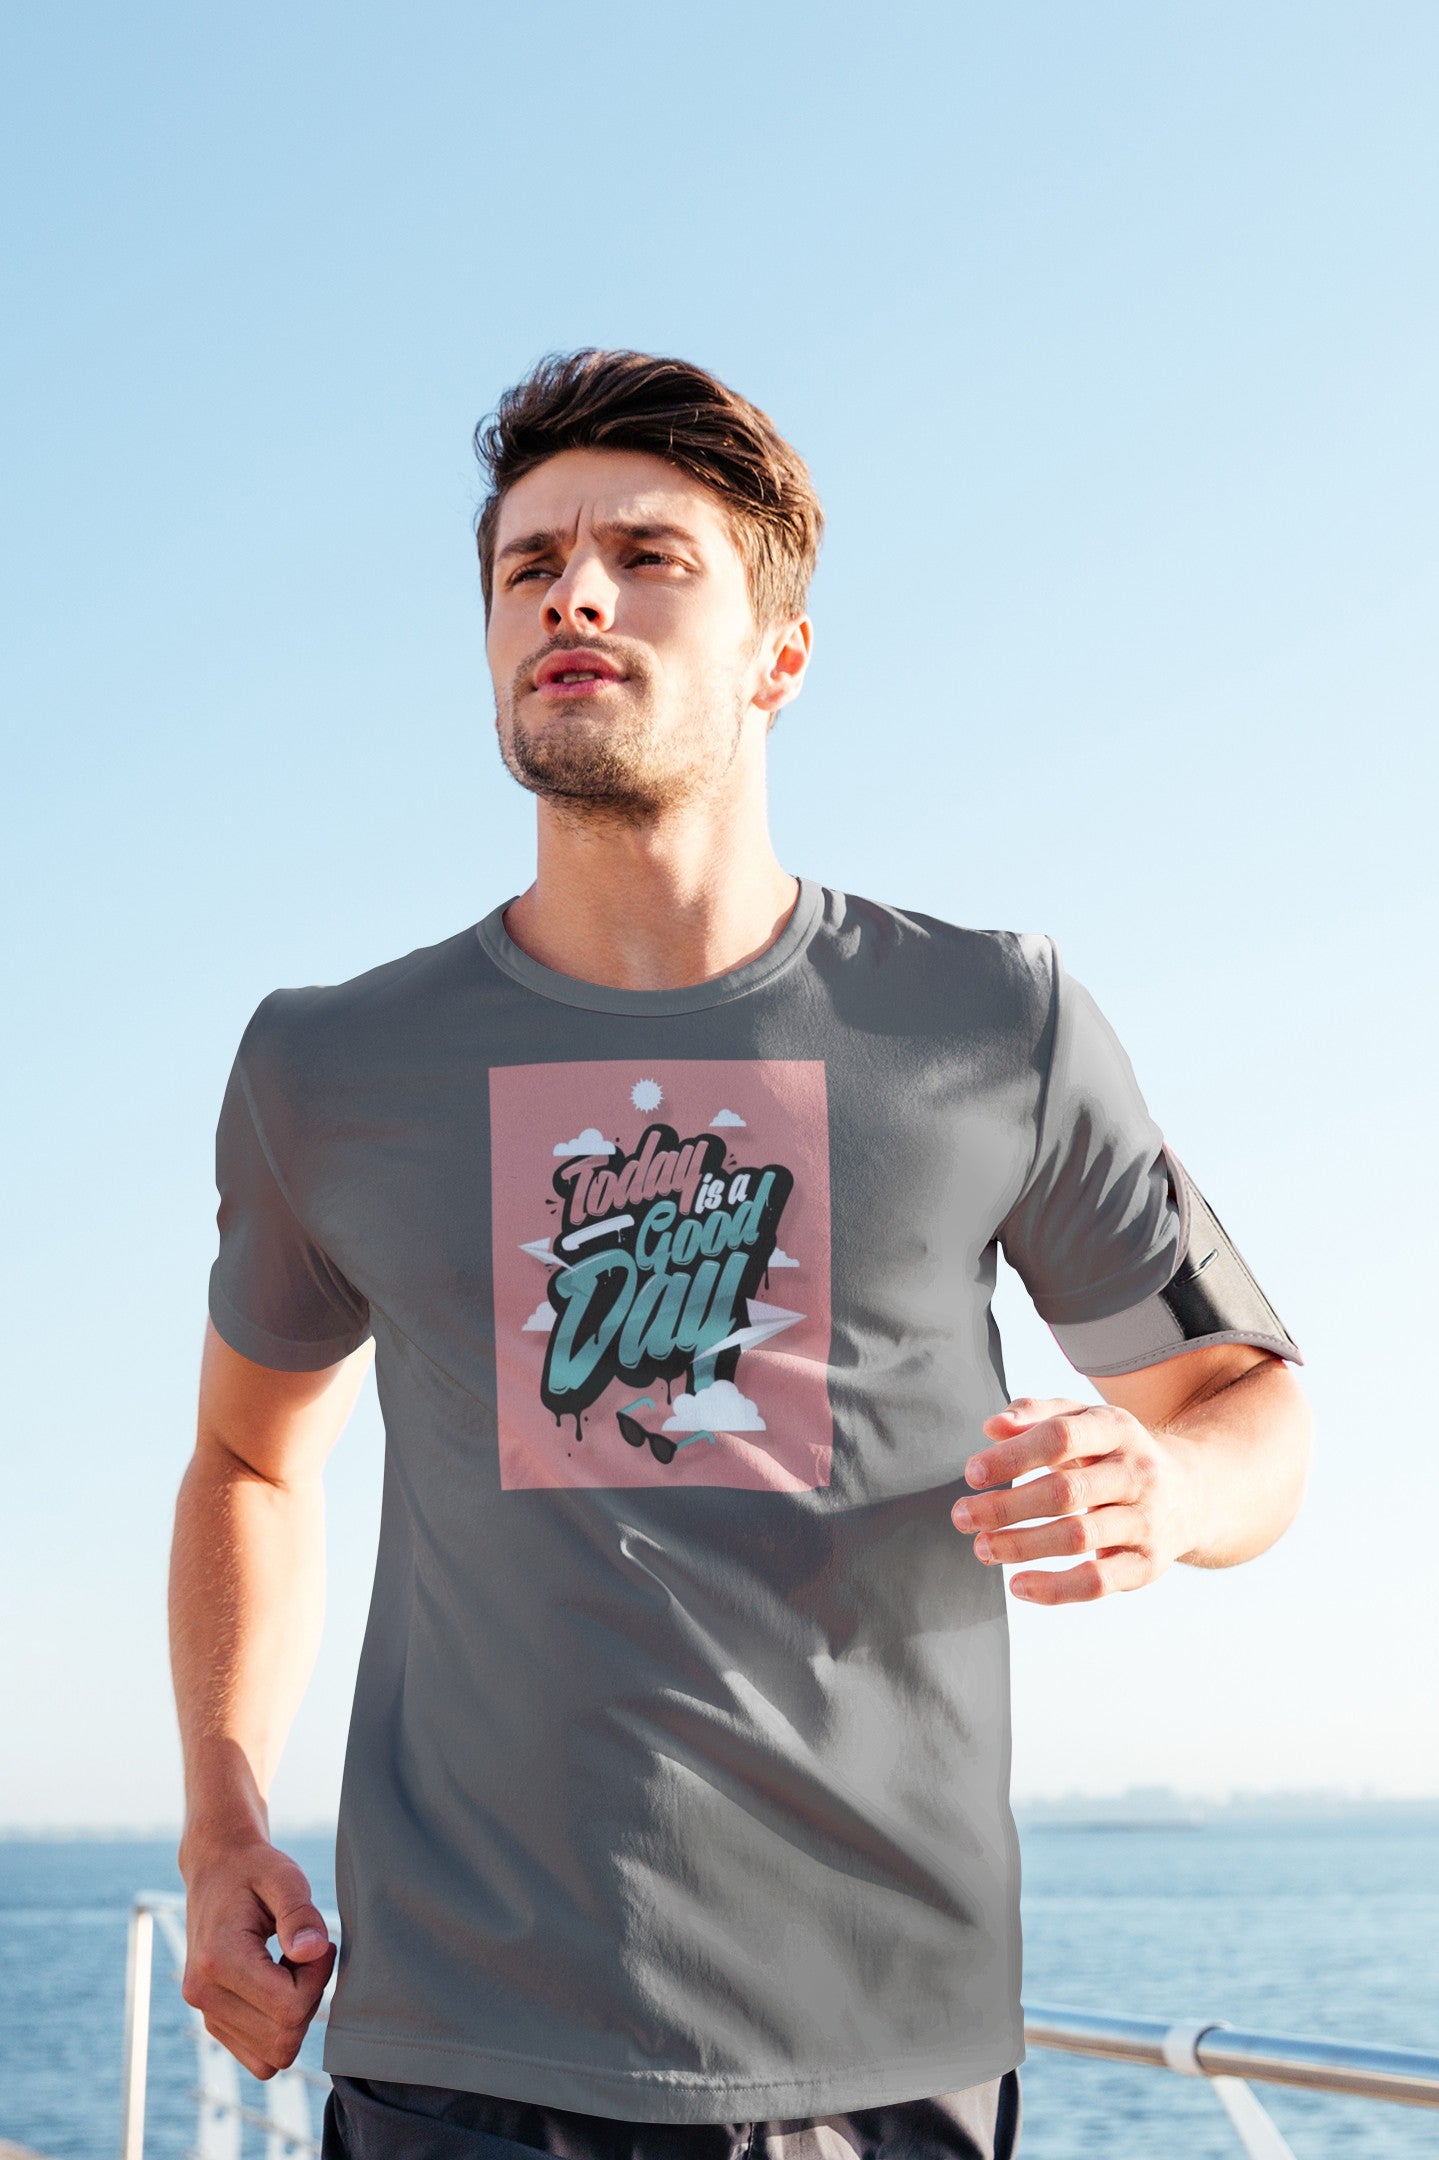 Gym T Shirt - Today Is A Good Day with premium cotton Lycra. The Sports T Shirt by Strong Soul